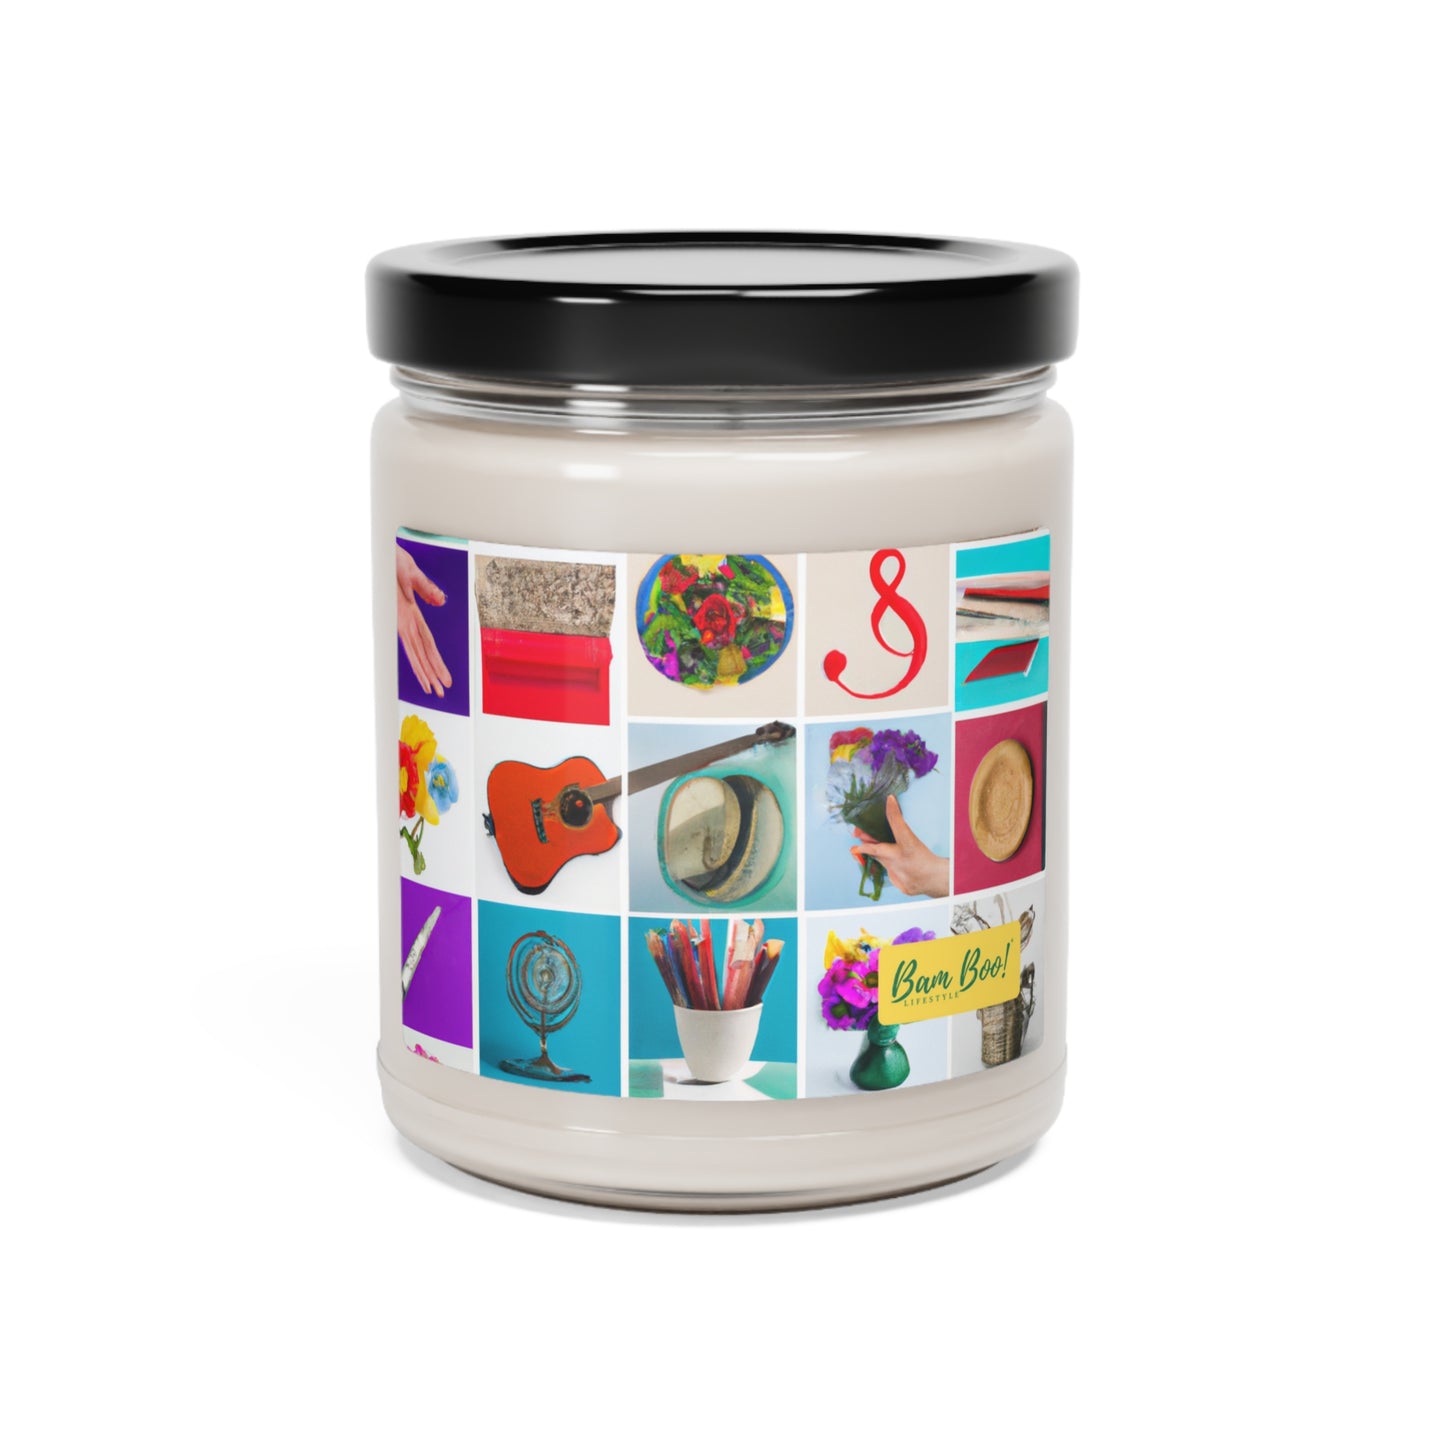 "Exploring My Self: A Reflection Collage" - Bam Boo! Lifestyle Eco-friendly Soy Candle